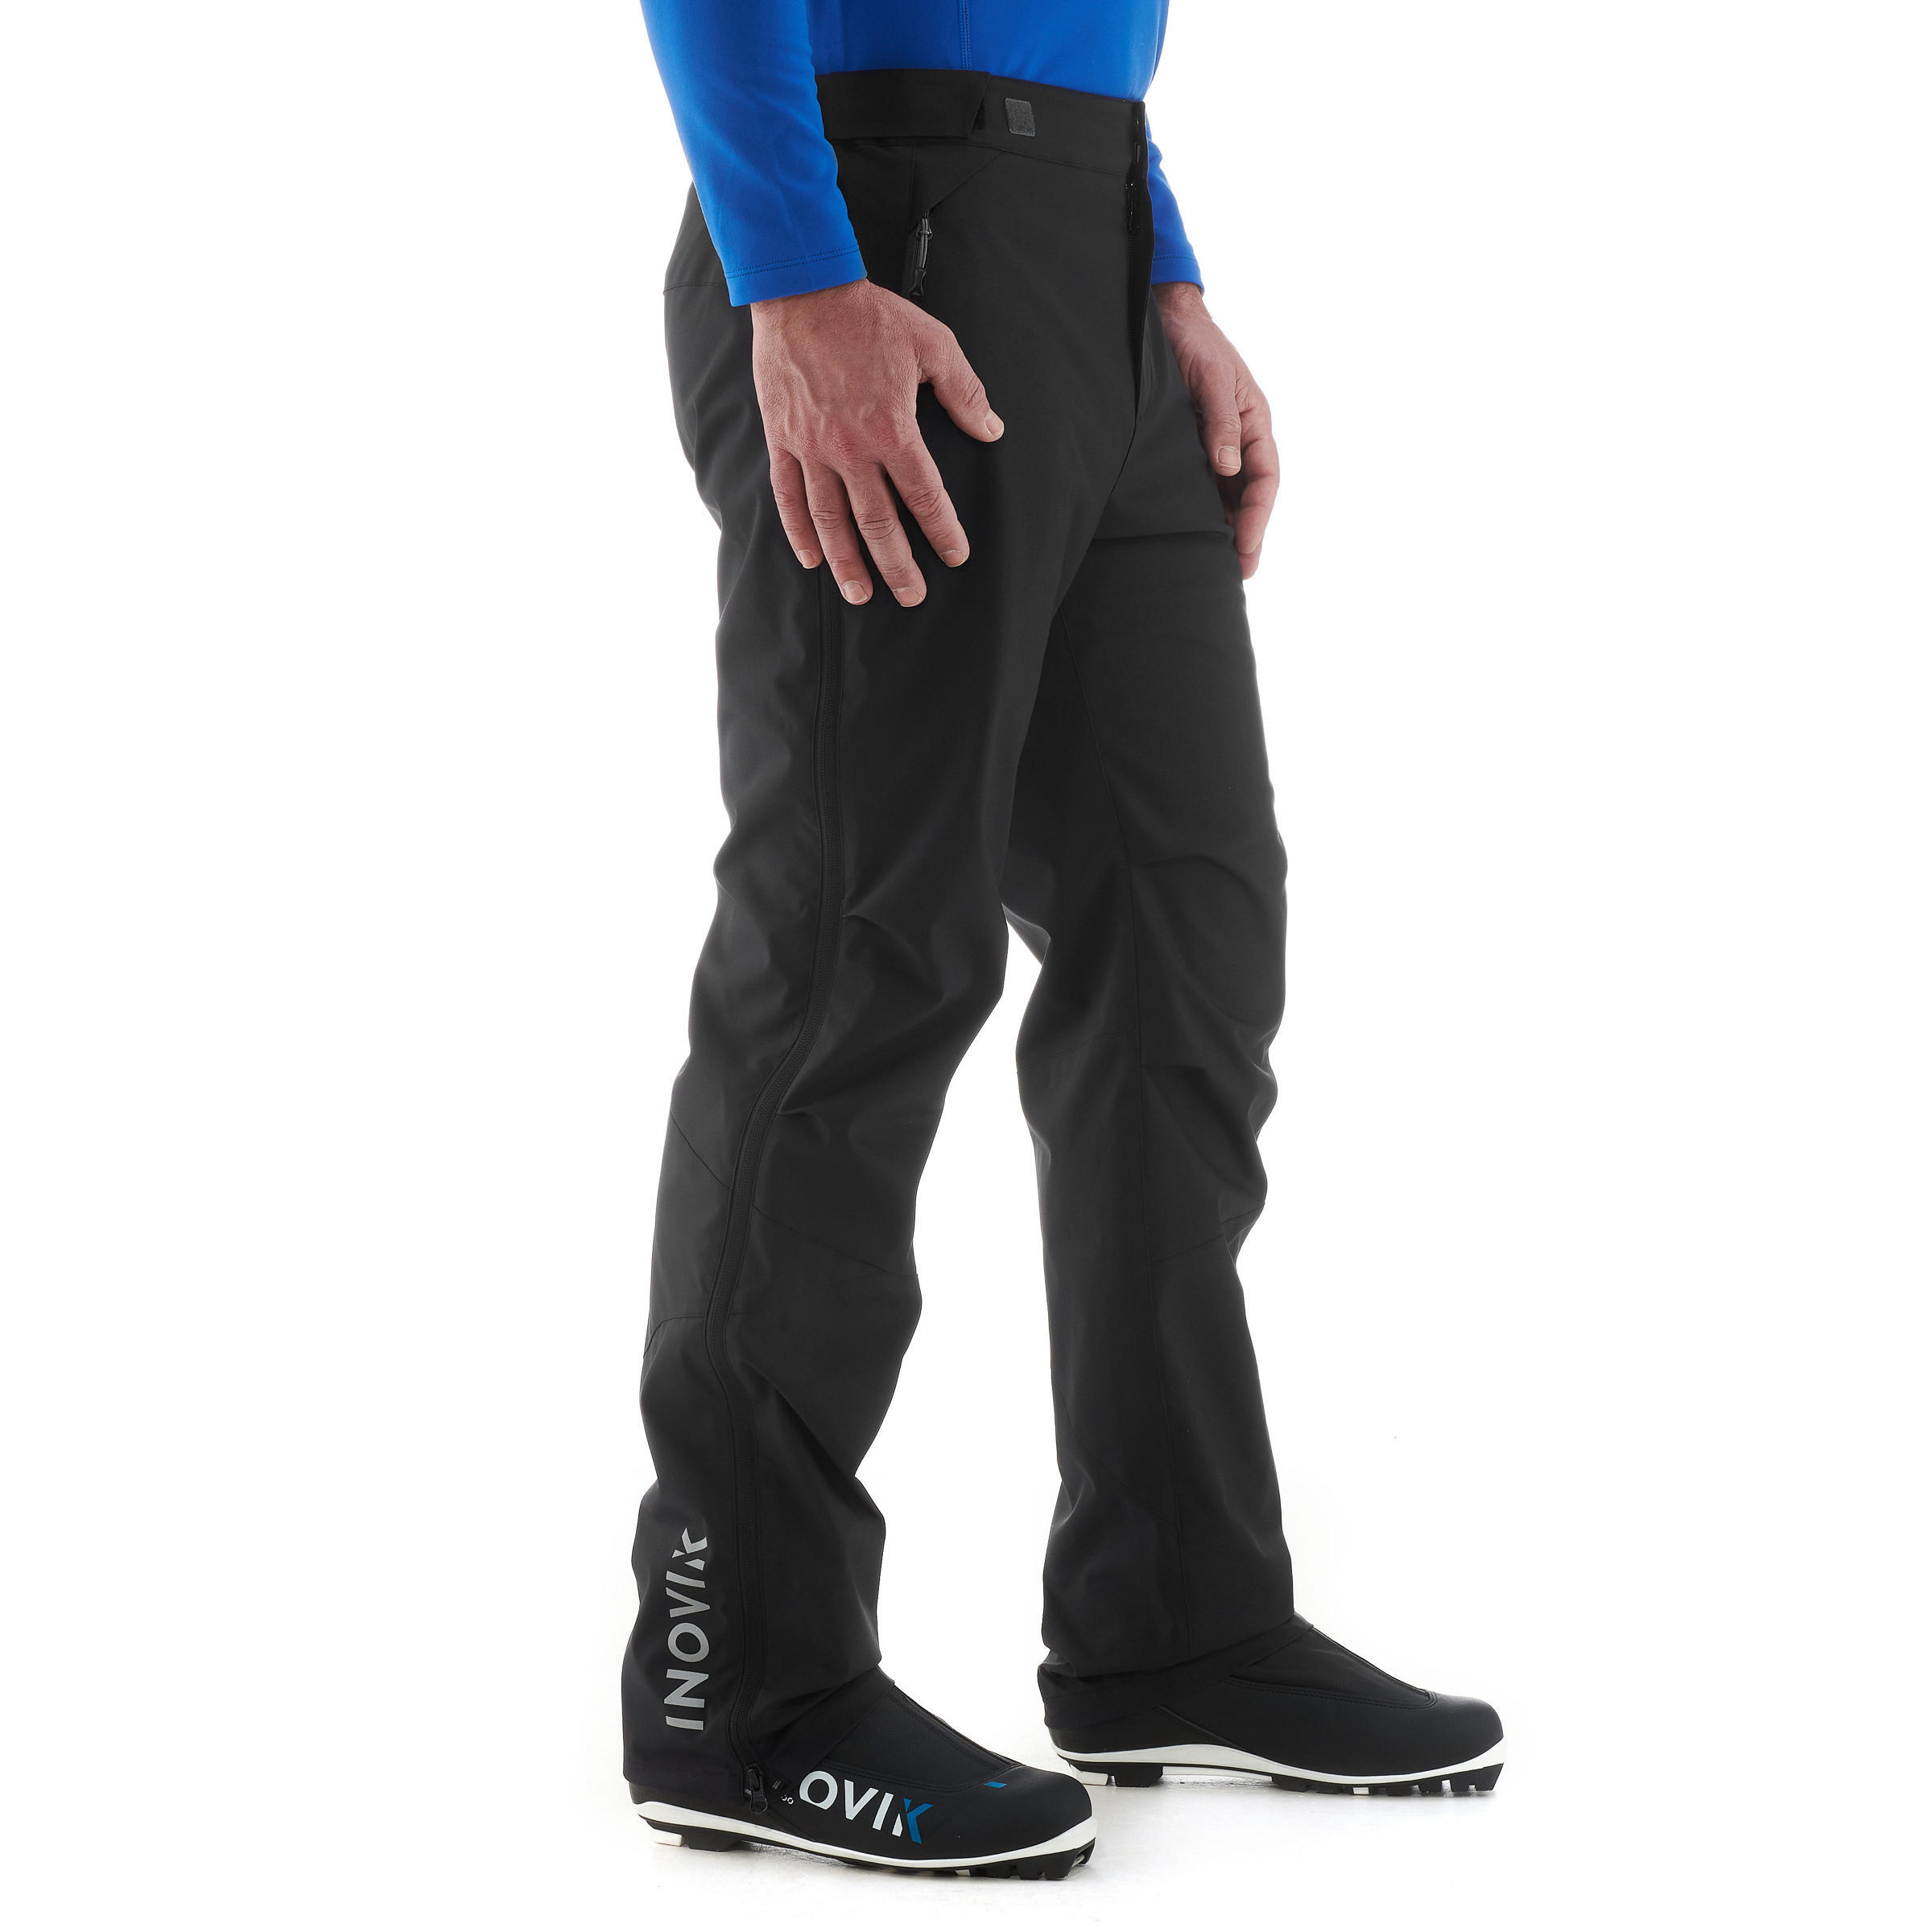 MEN'S Cross-Country Skiing Over-Trousers XC S OVERP 150 - Black 4/8